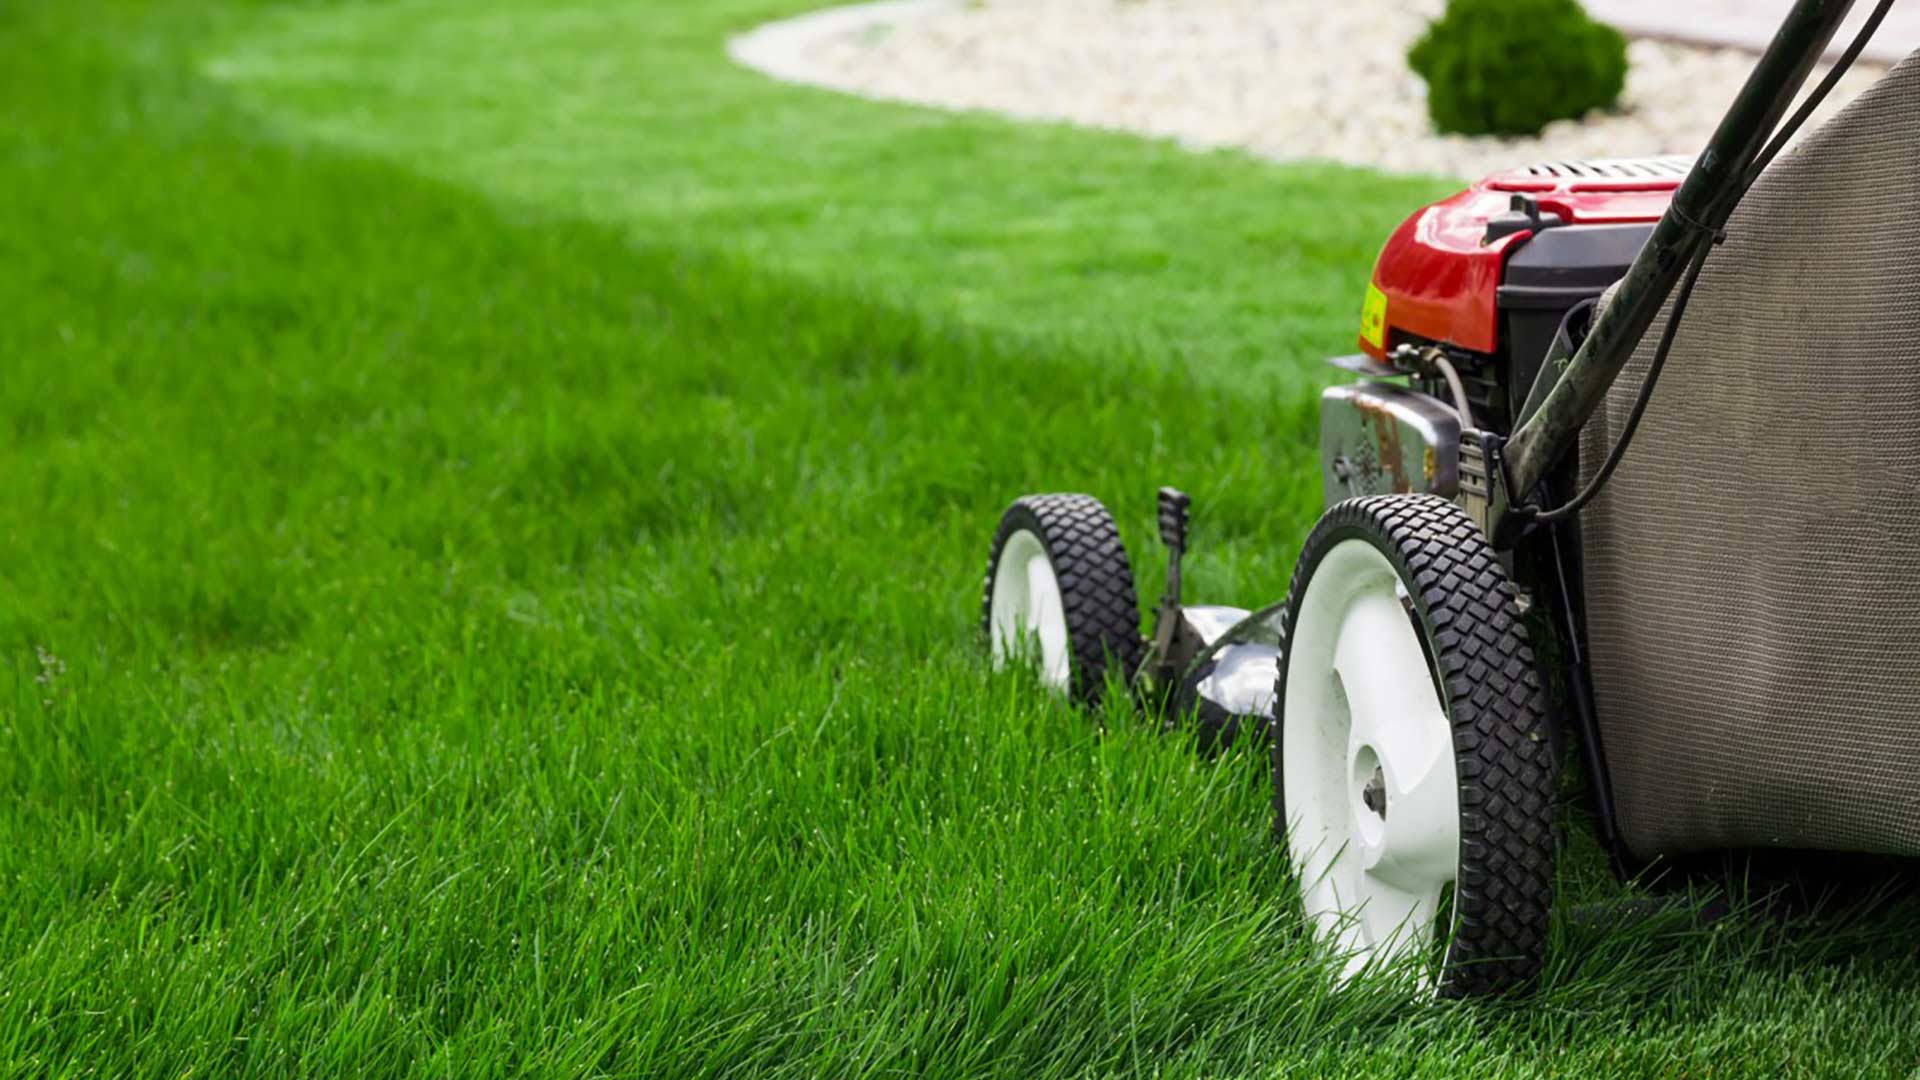 The Quick and Easy Guide to Fertilizing Your Lawn and Keeping It Healthy